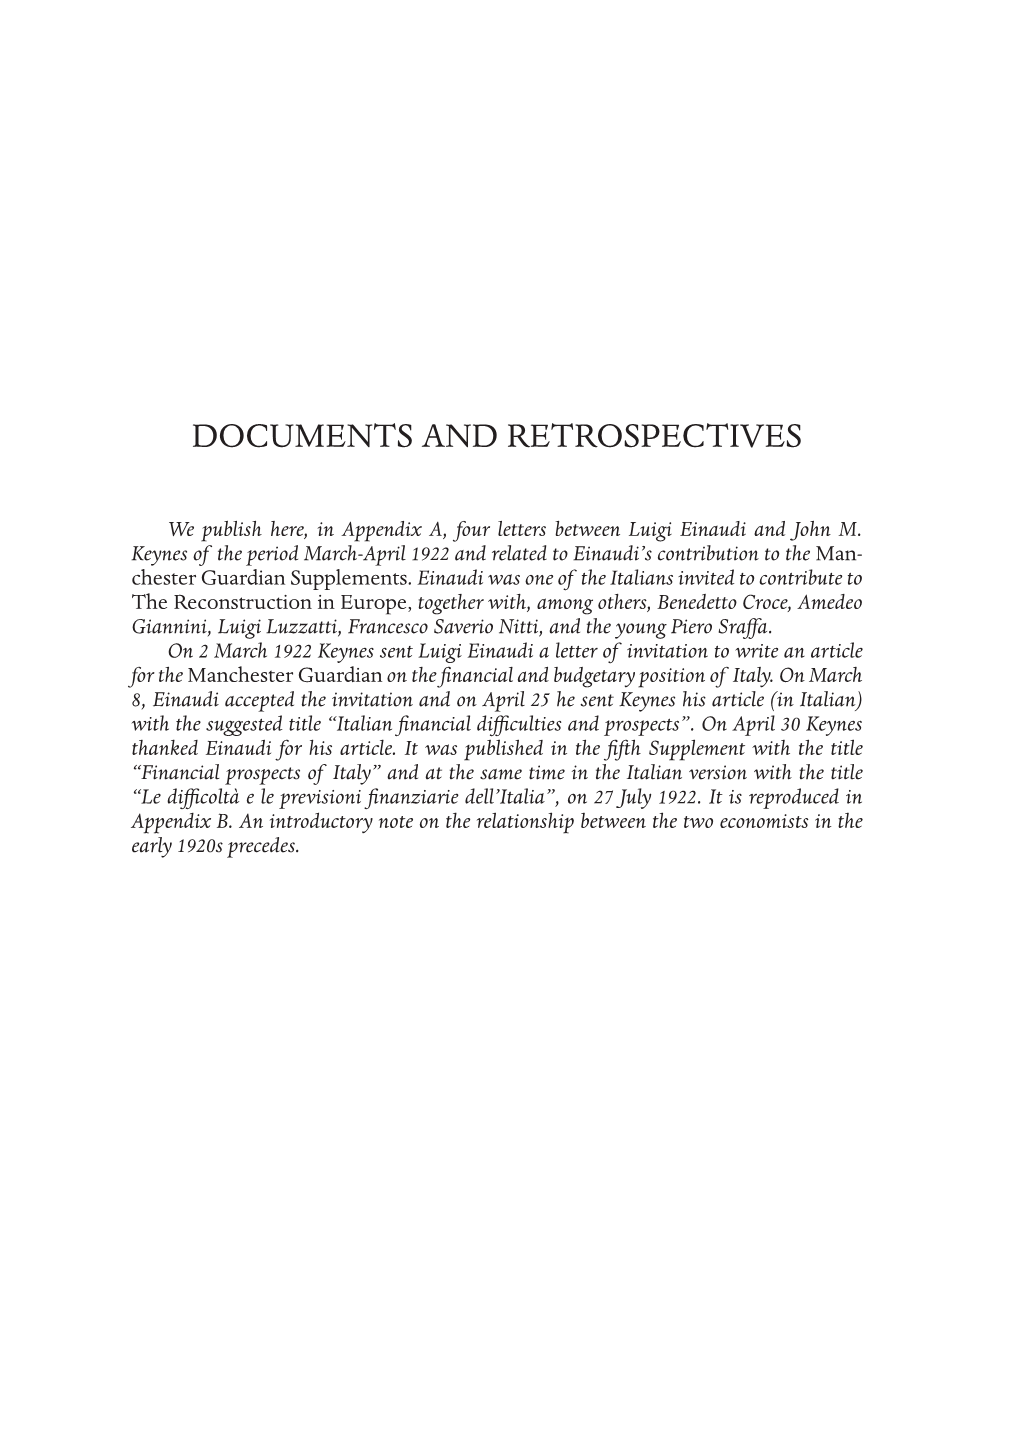 Documents and Retrospectives